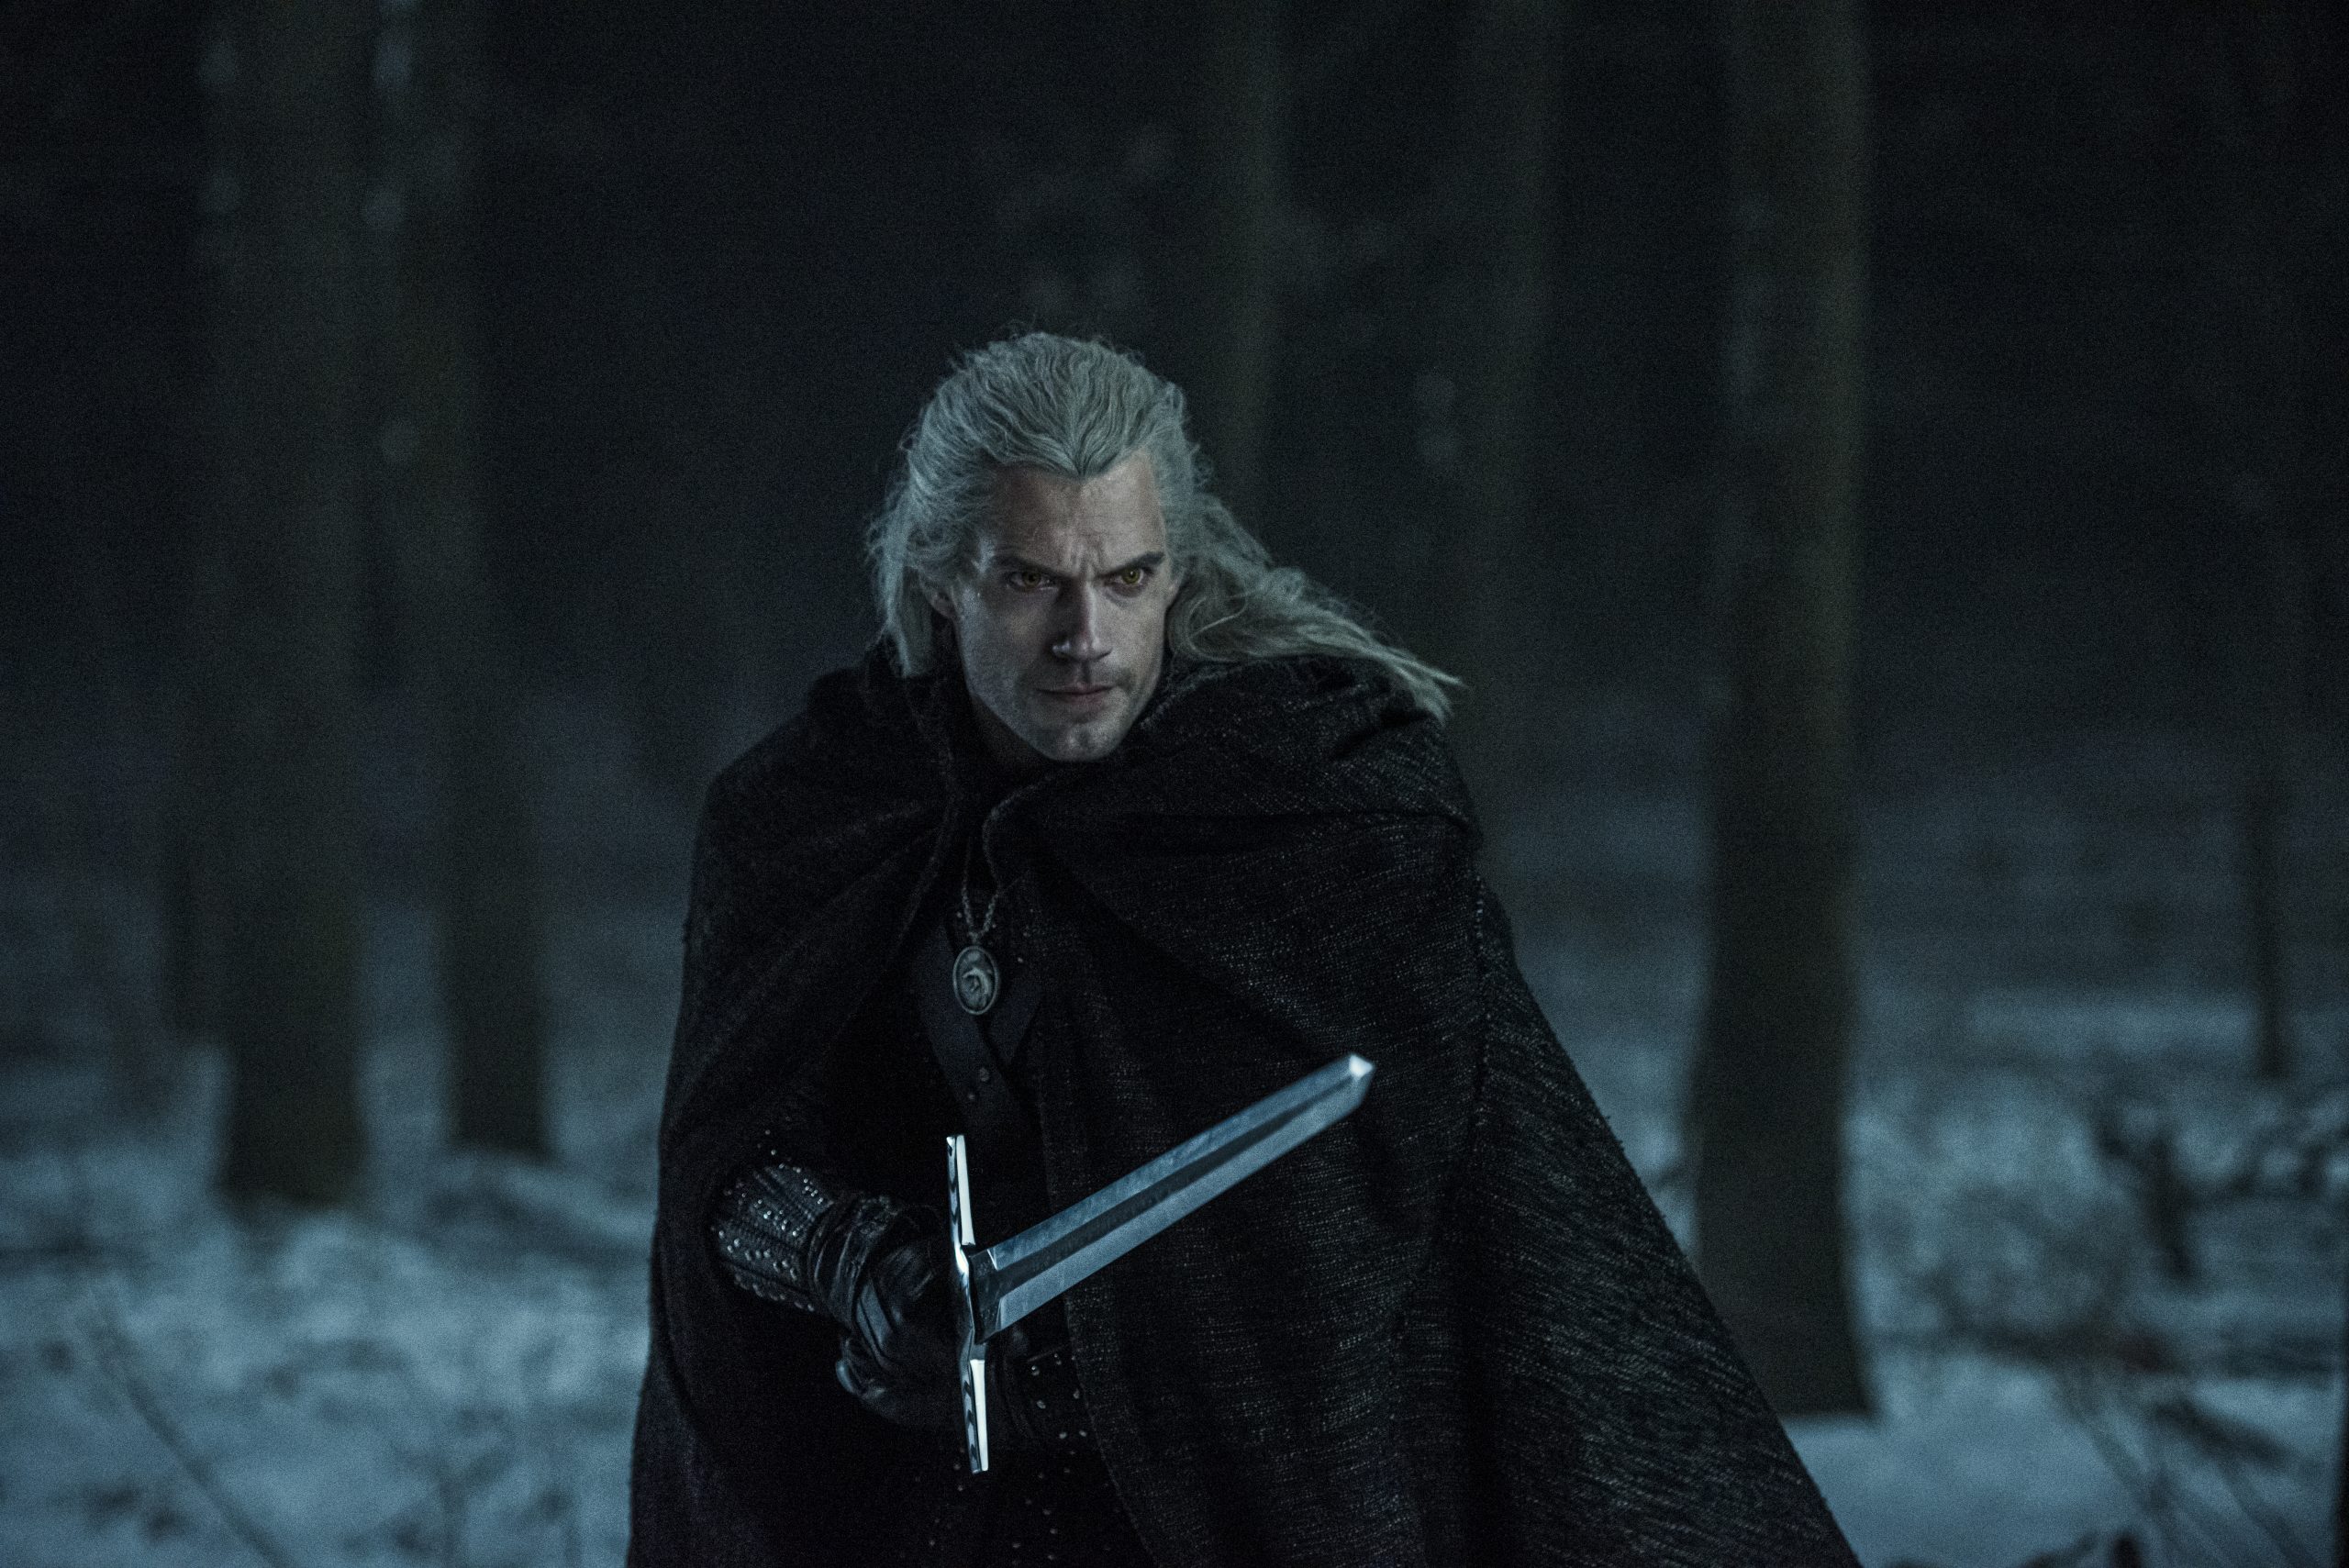 Geralt (Henry Cavill) draws his steel sword in The Witcher Season 1 Episode 4 “Of Banquets, Bastards, and Burials” (2019), Netflix